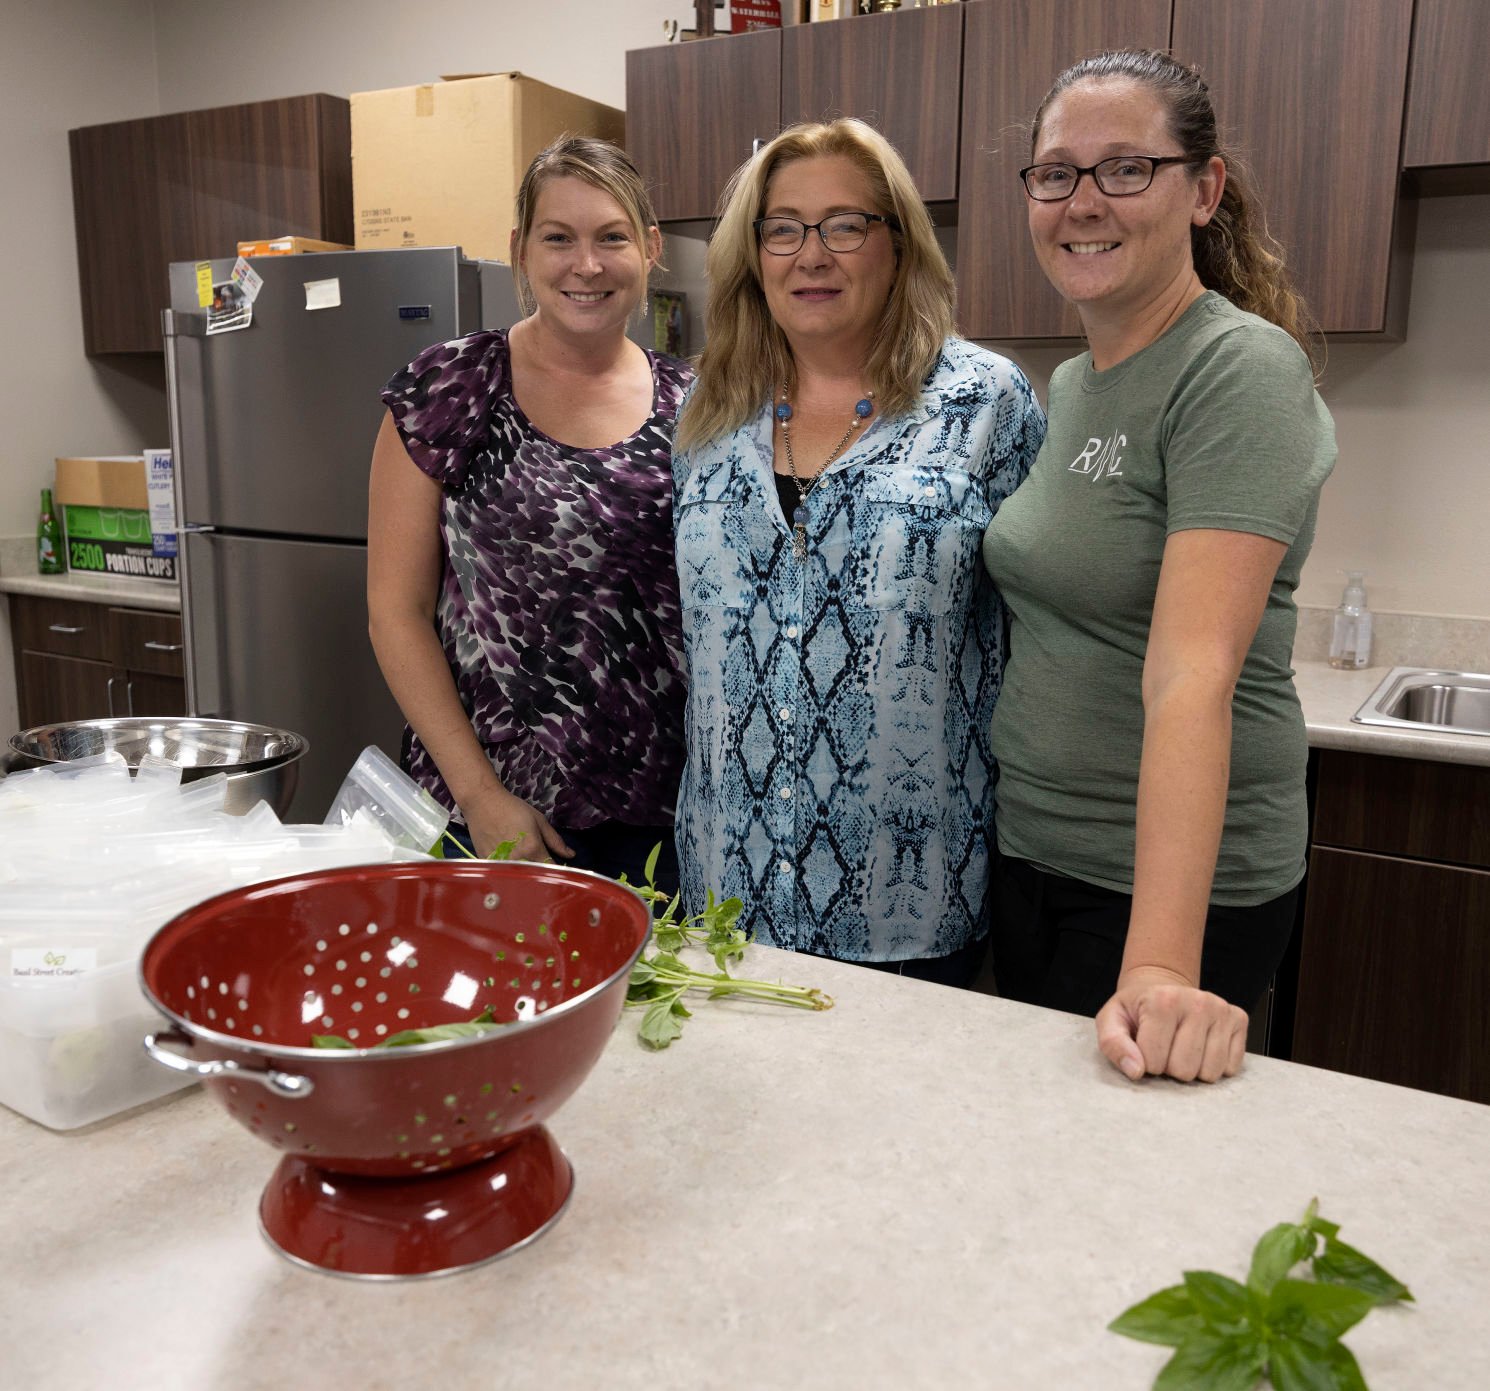 Samantha Koppes (from left), Jill Wagener and Kayla Wagener own Basil Street Creations. The Hopkinton, Iowa, family business focuses on basil. Their products are at farmers markets and a store in Maquoketa, Iowa.    PHOTO CREDIT: Stephen Gassman